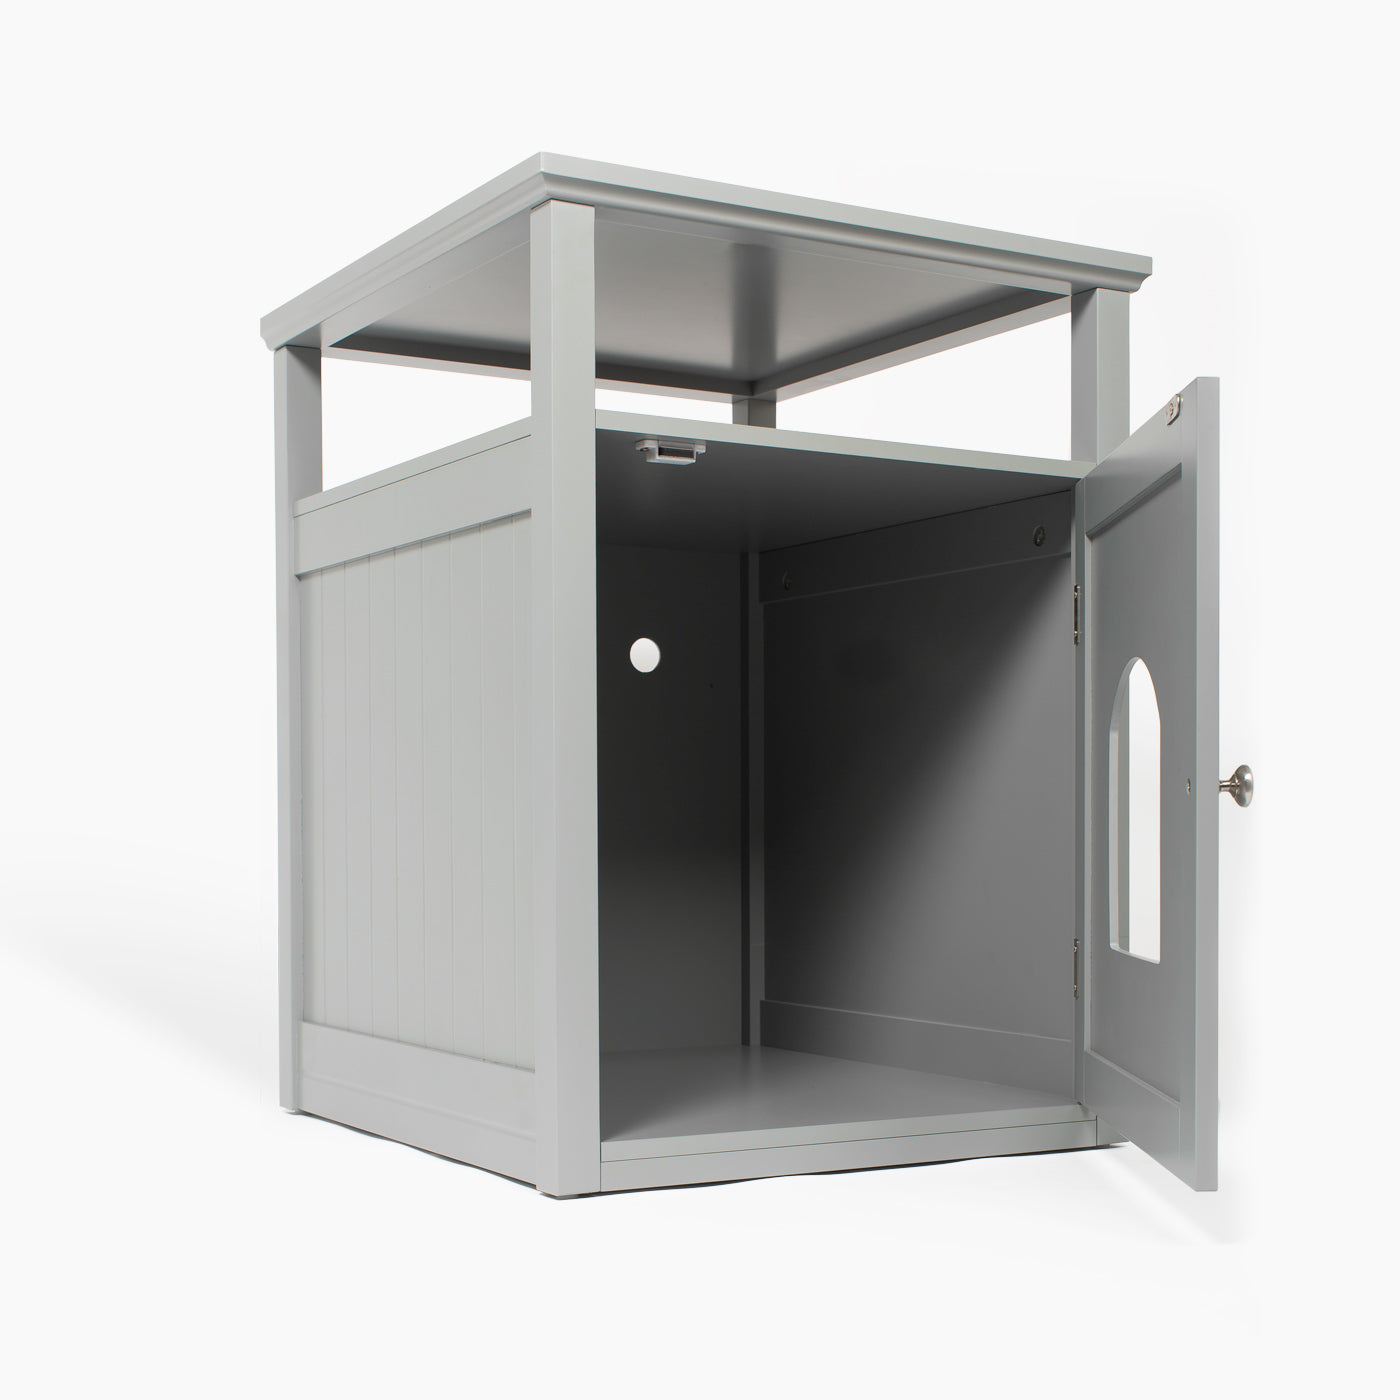 Discover The Perfect Multi-Functional Cat Washroom, Featuring Hinged Door for a Discreet Cat Loo. Suitable for All Cat Breeds! Made From Durable Wood to Ensure a Stylish Finish That Suits Any Home Decor! Includes a Complimentary Litter Tray. Available In Grey & White Now at Lords & Labradors